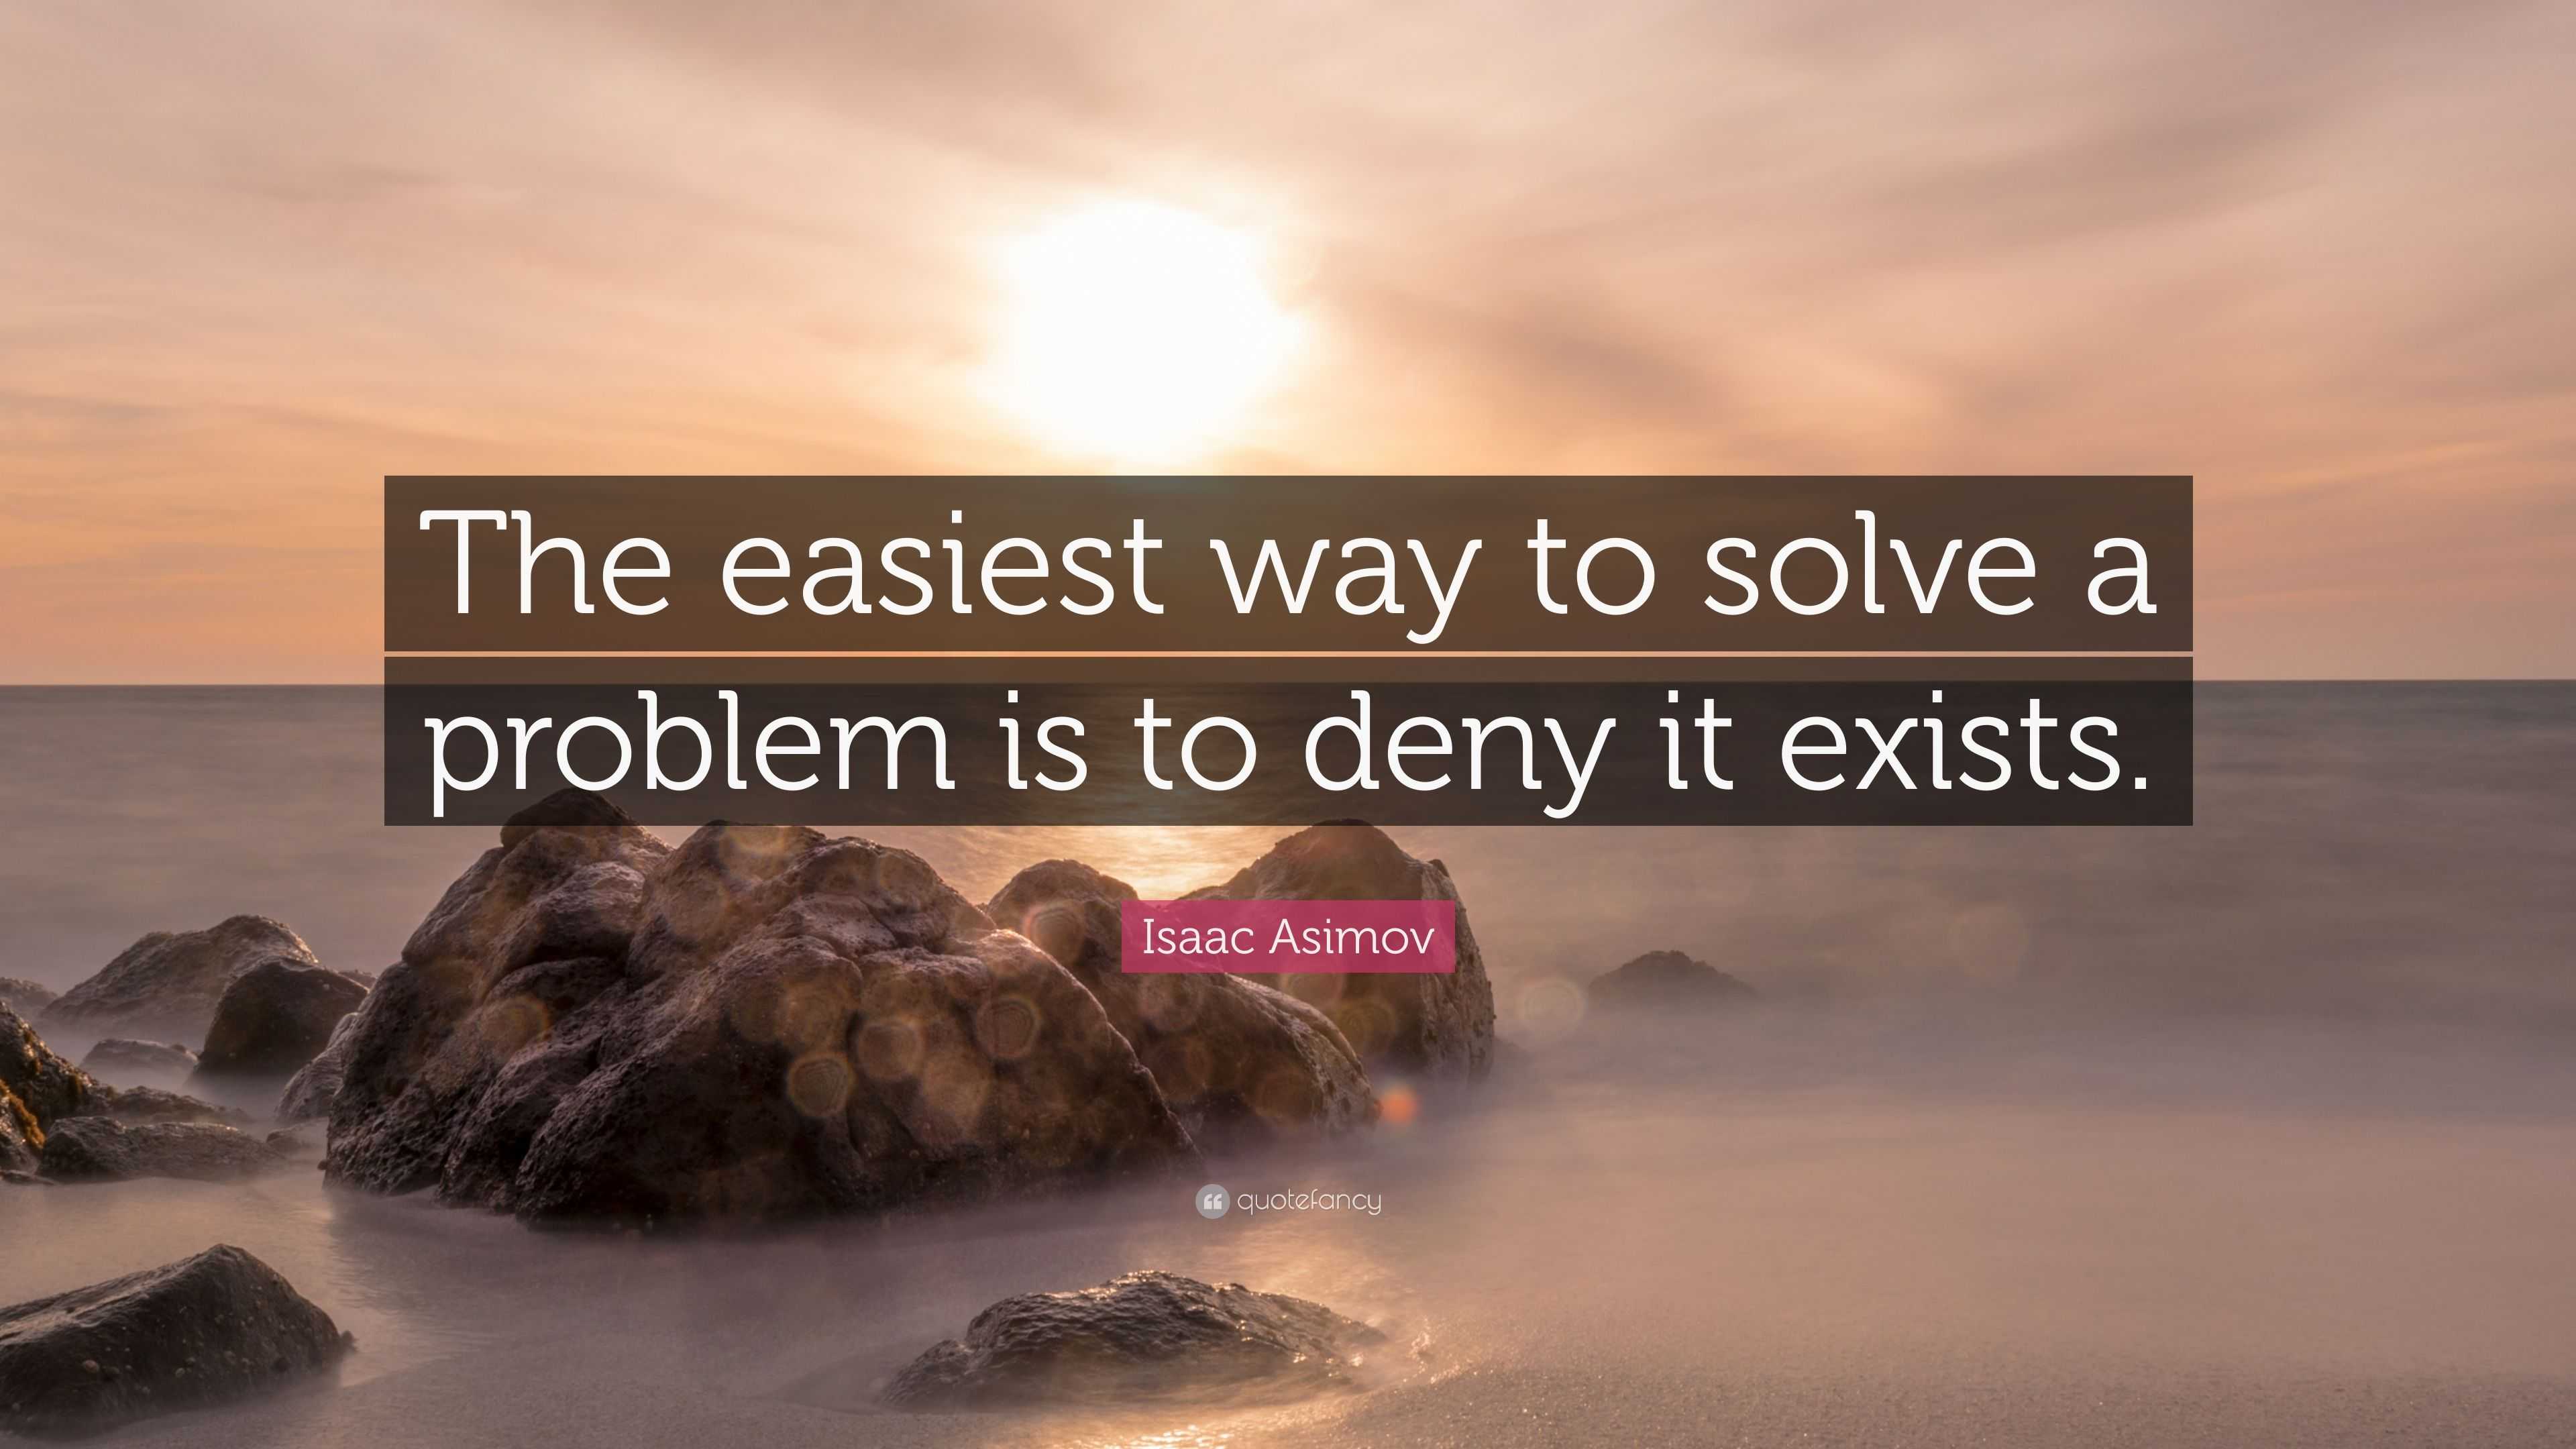 Isaac Asimov Quote: “The easiest way to solve a problem is to deny it ...